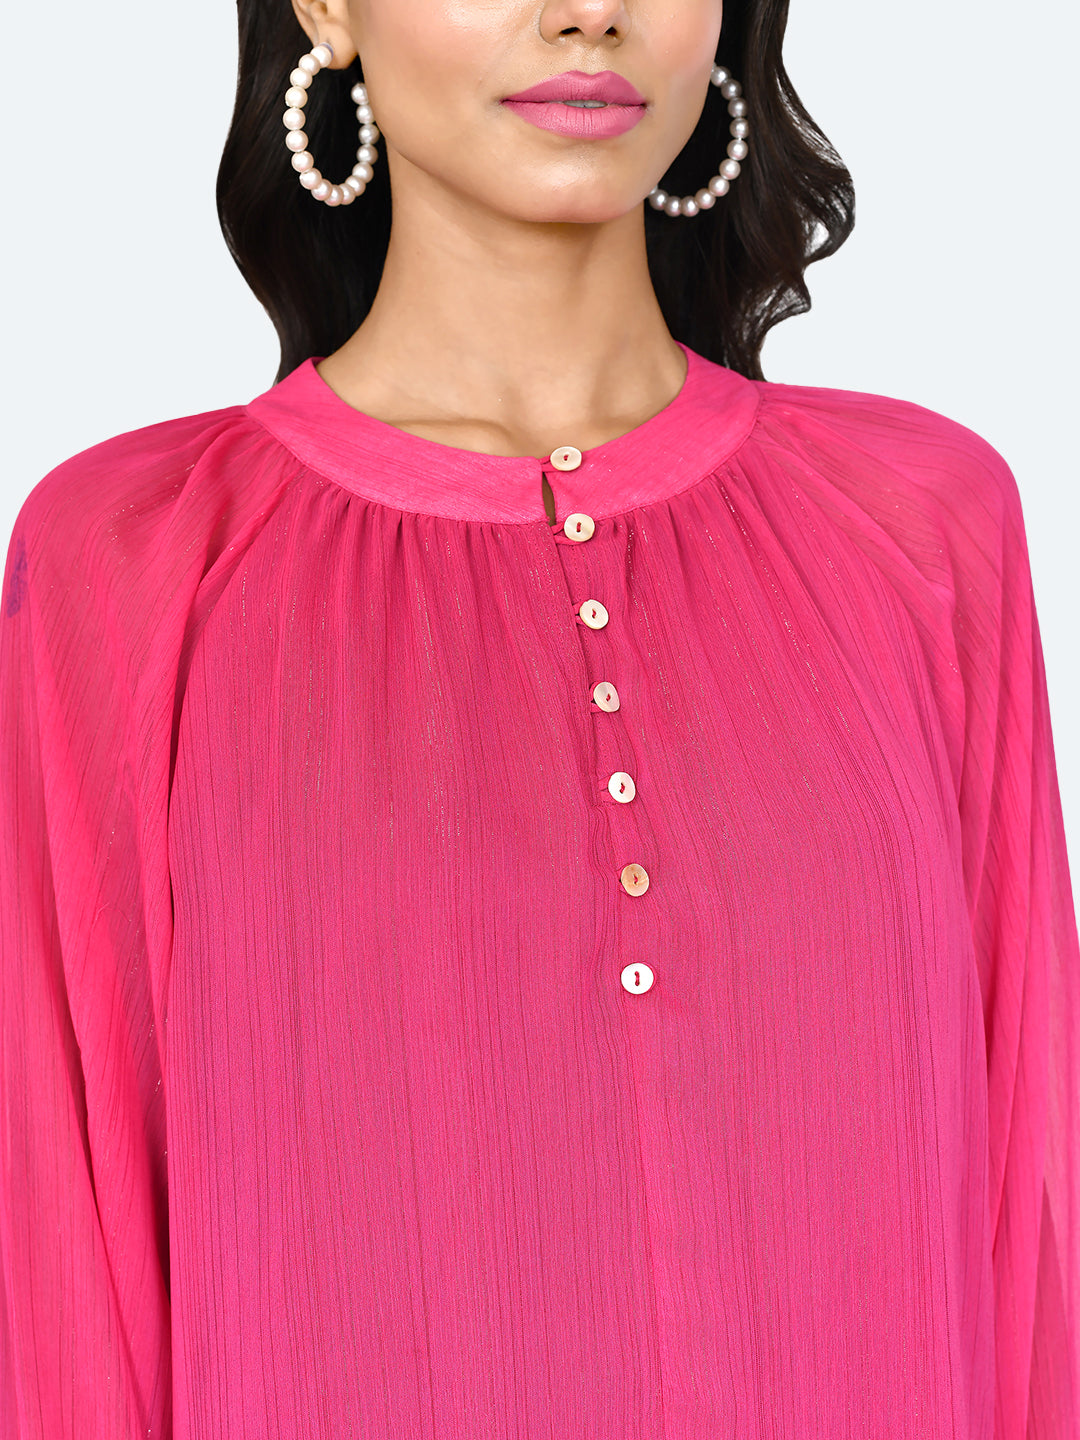 Pink Solid Buttoned Top For Women